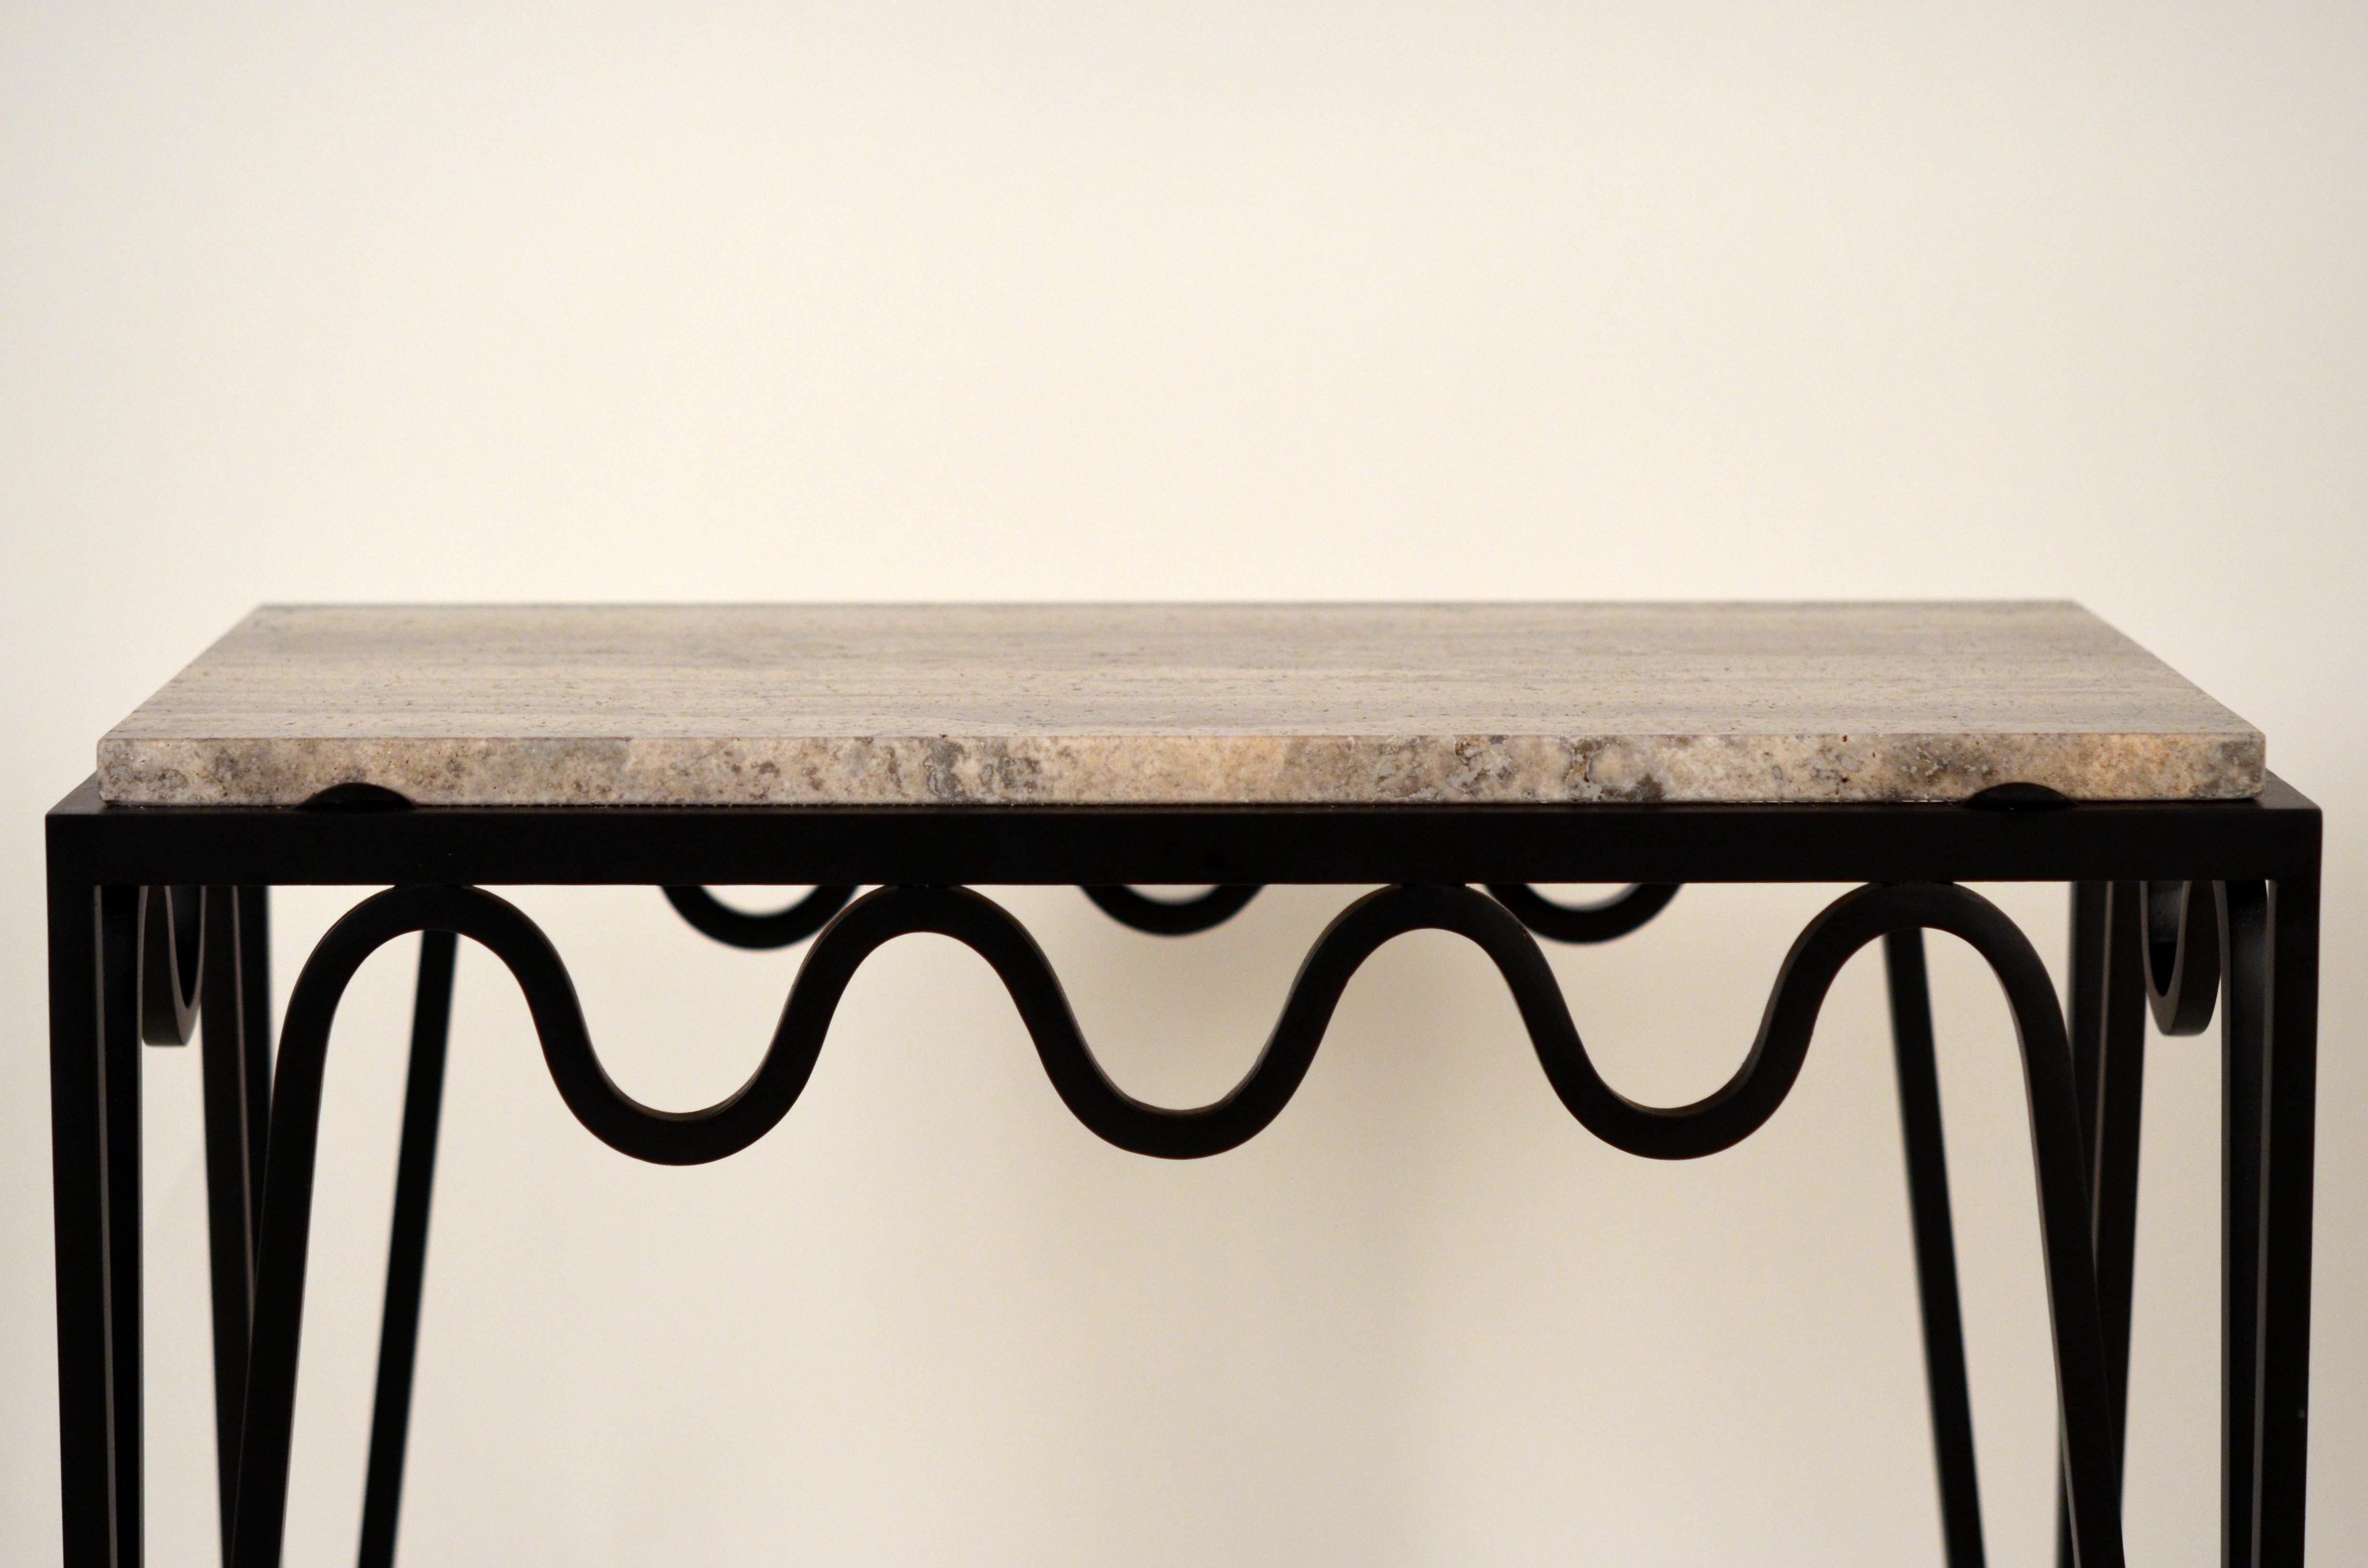 'Méandre' Black Iron and Silver Travertine Side or End Table by Design Frères In New Condition For Sale In Los Angeles, CA